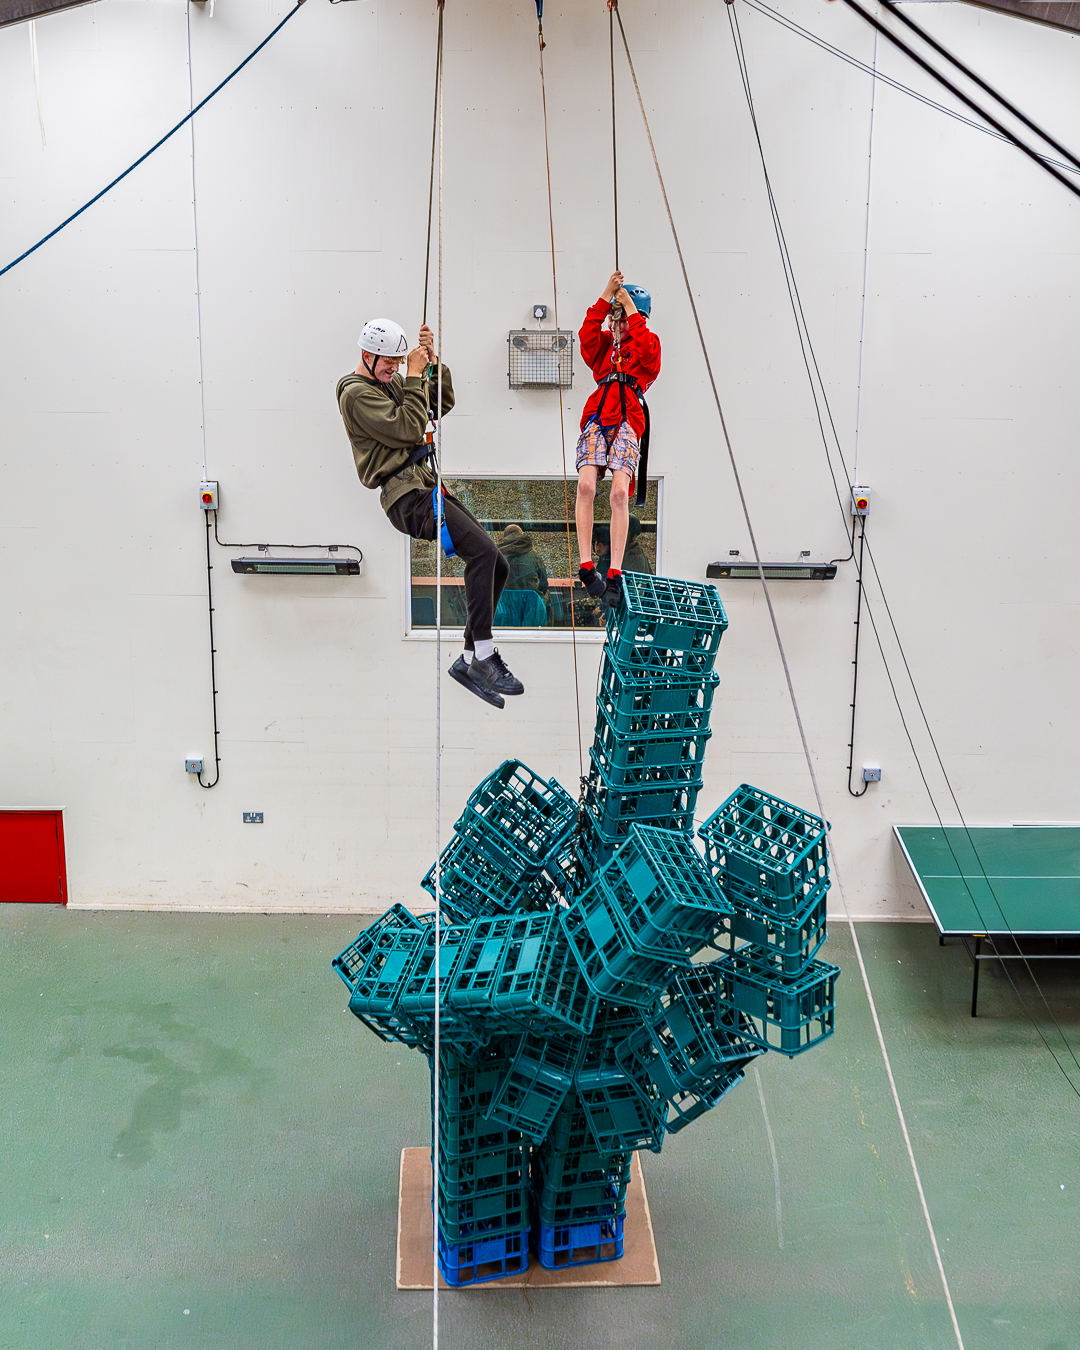 Two people with harnesses and helmets on are suspended high in the air on ropes with a tower of crates beneath them crumbling to the floor.